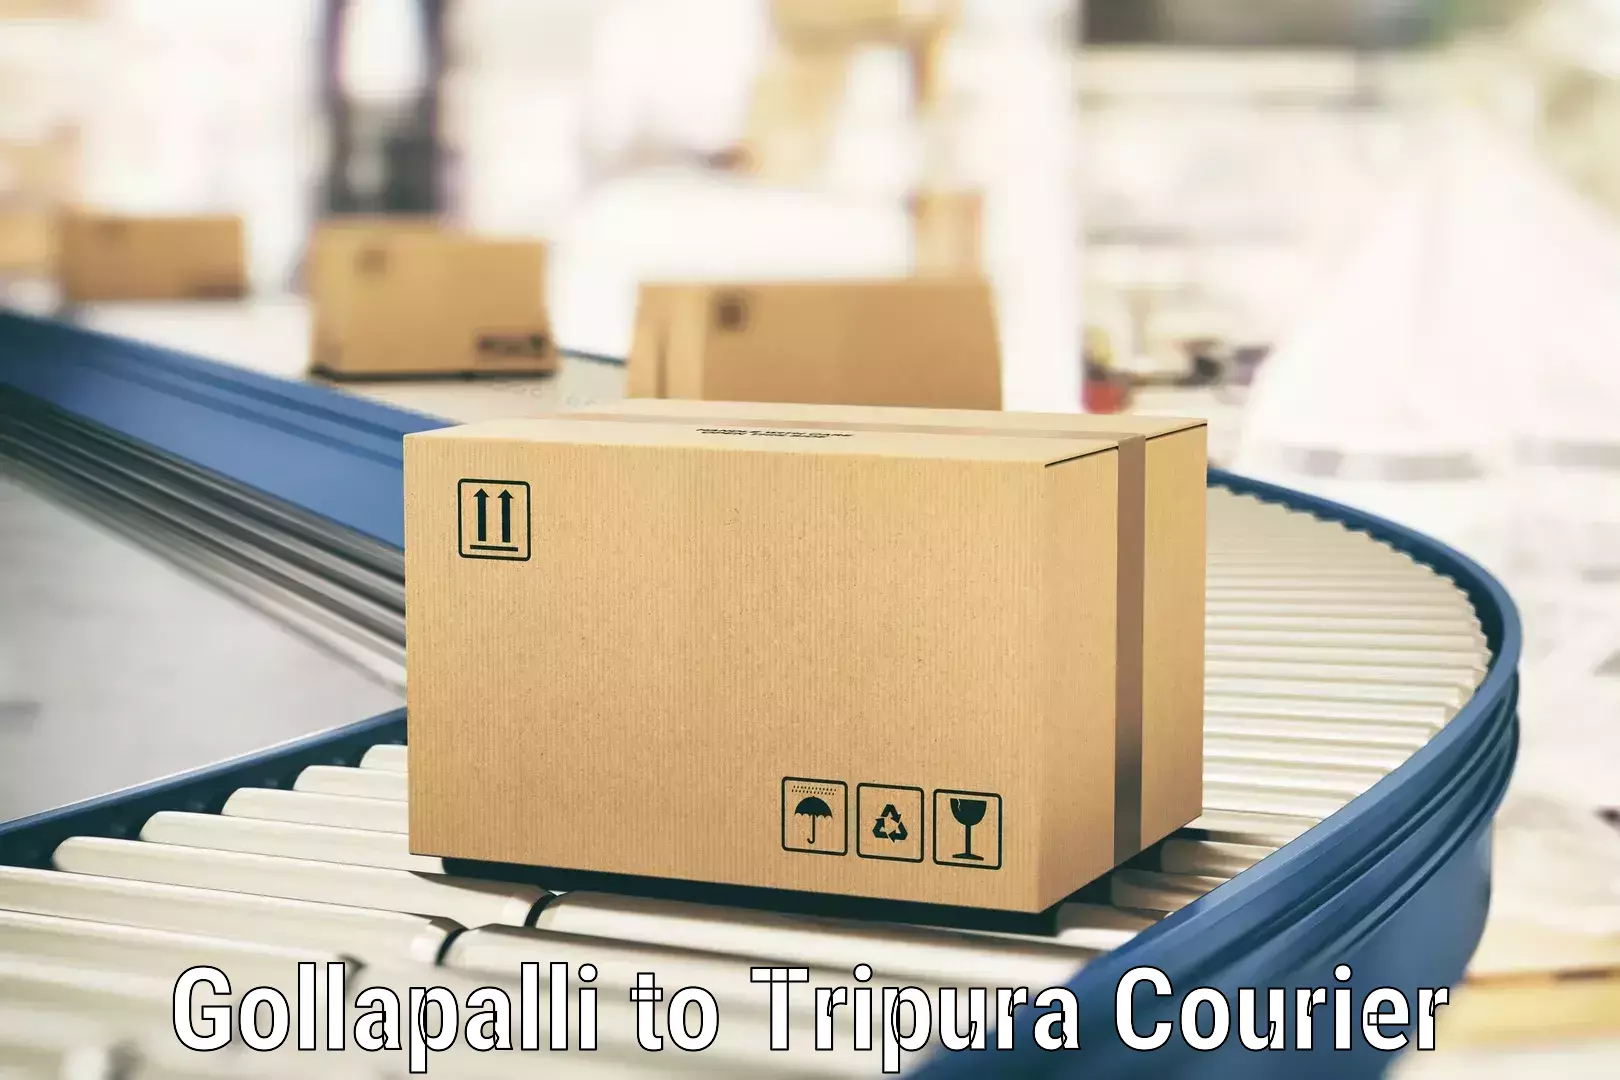 Bulk courier orders in Gollapalli to Udaipur Tripura